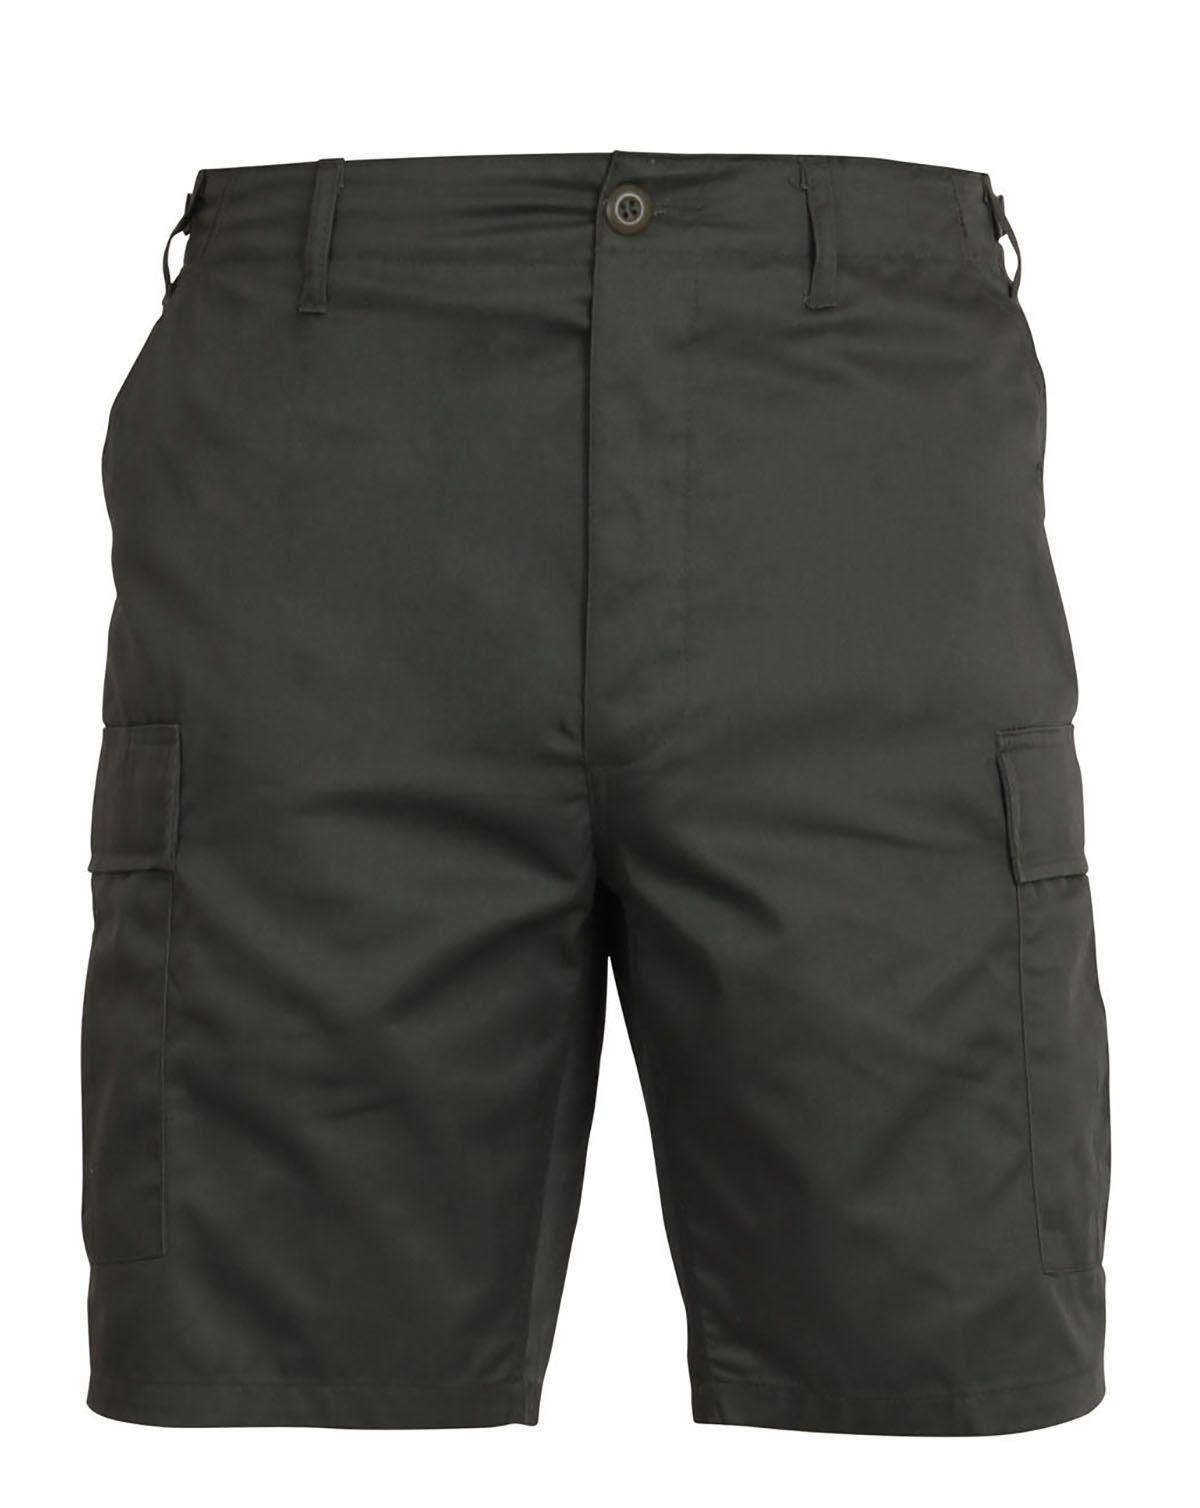 LARGE Khaki Details about   ROTHCO BDU 5765 Army BDU Combat Shorts 